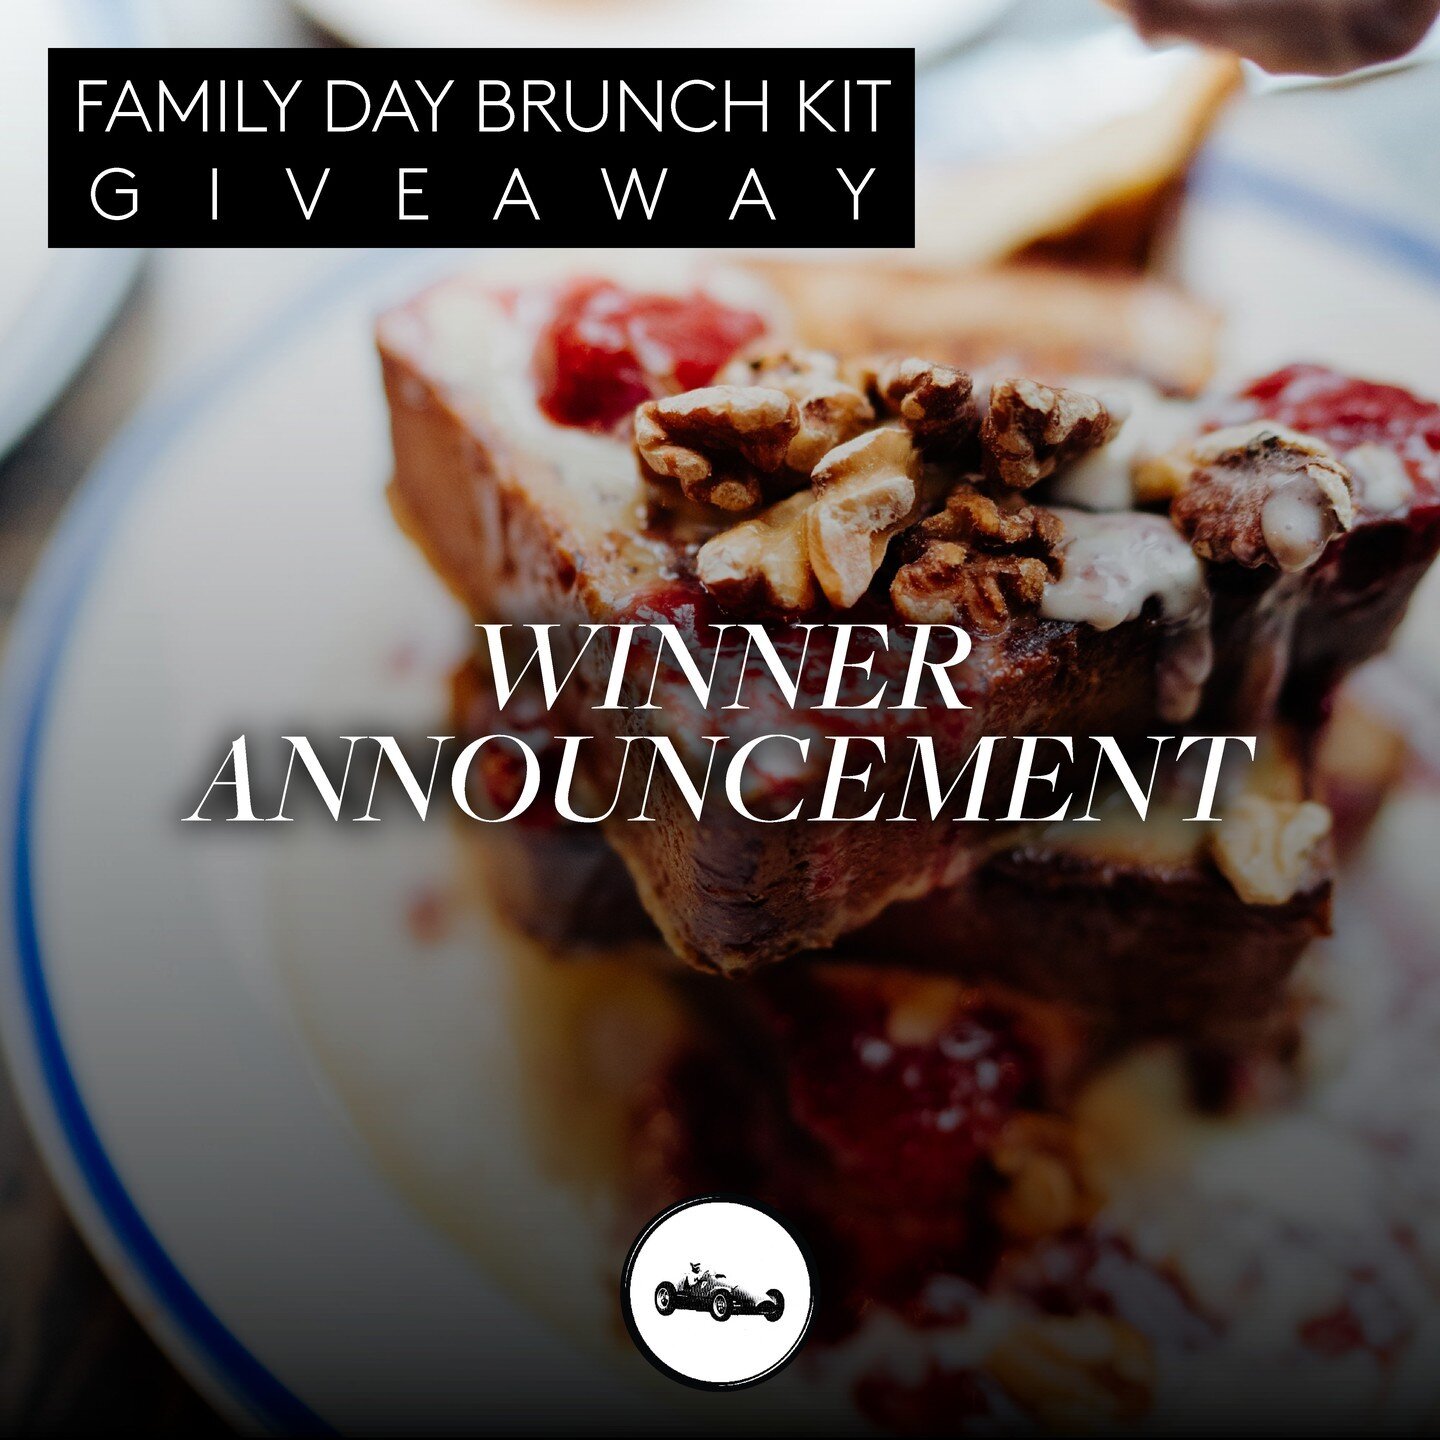 ⭐ ⭐ GIVEAWAY WINNER ⭐ ⭐

Congratulations to our giveaway winner, @adds29 !
We hope you enjoy the upcoming Family Day Weekend Brunch Kit.

Thank you so much to everyone who took part in our Family Day Weekend Brunch Kit Giveaway!
Please don&rsquo;t be